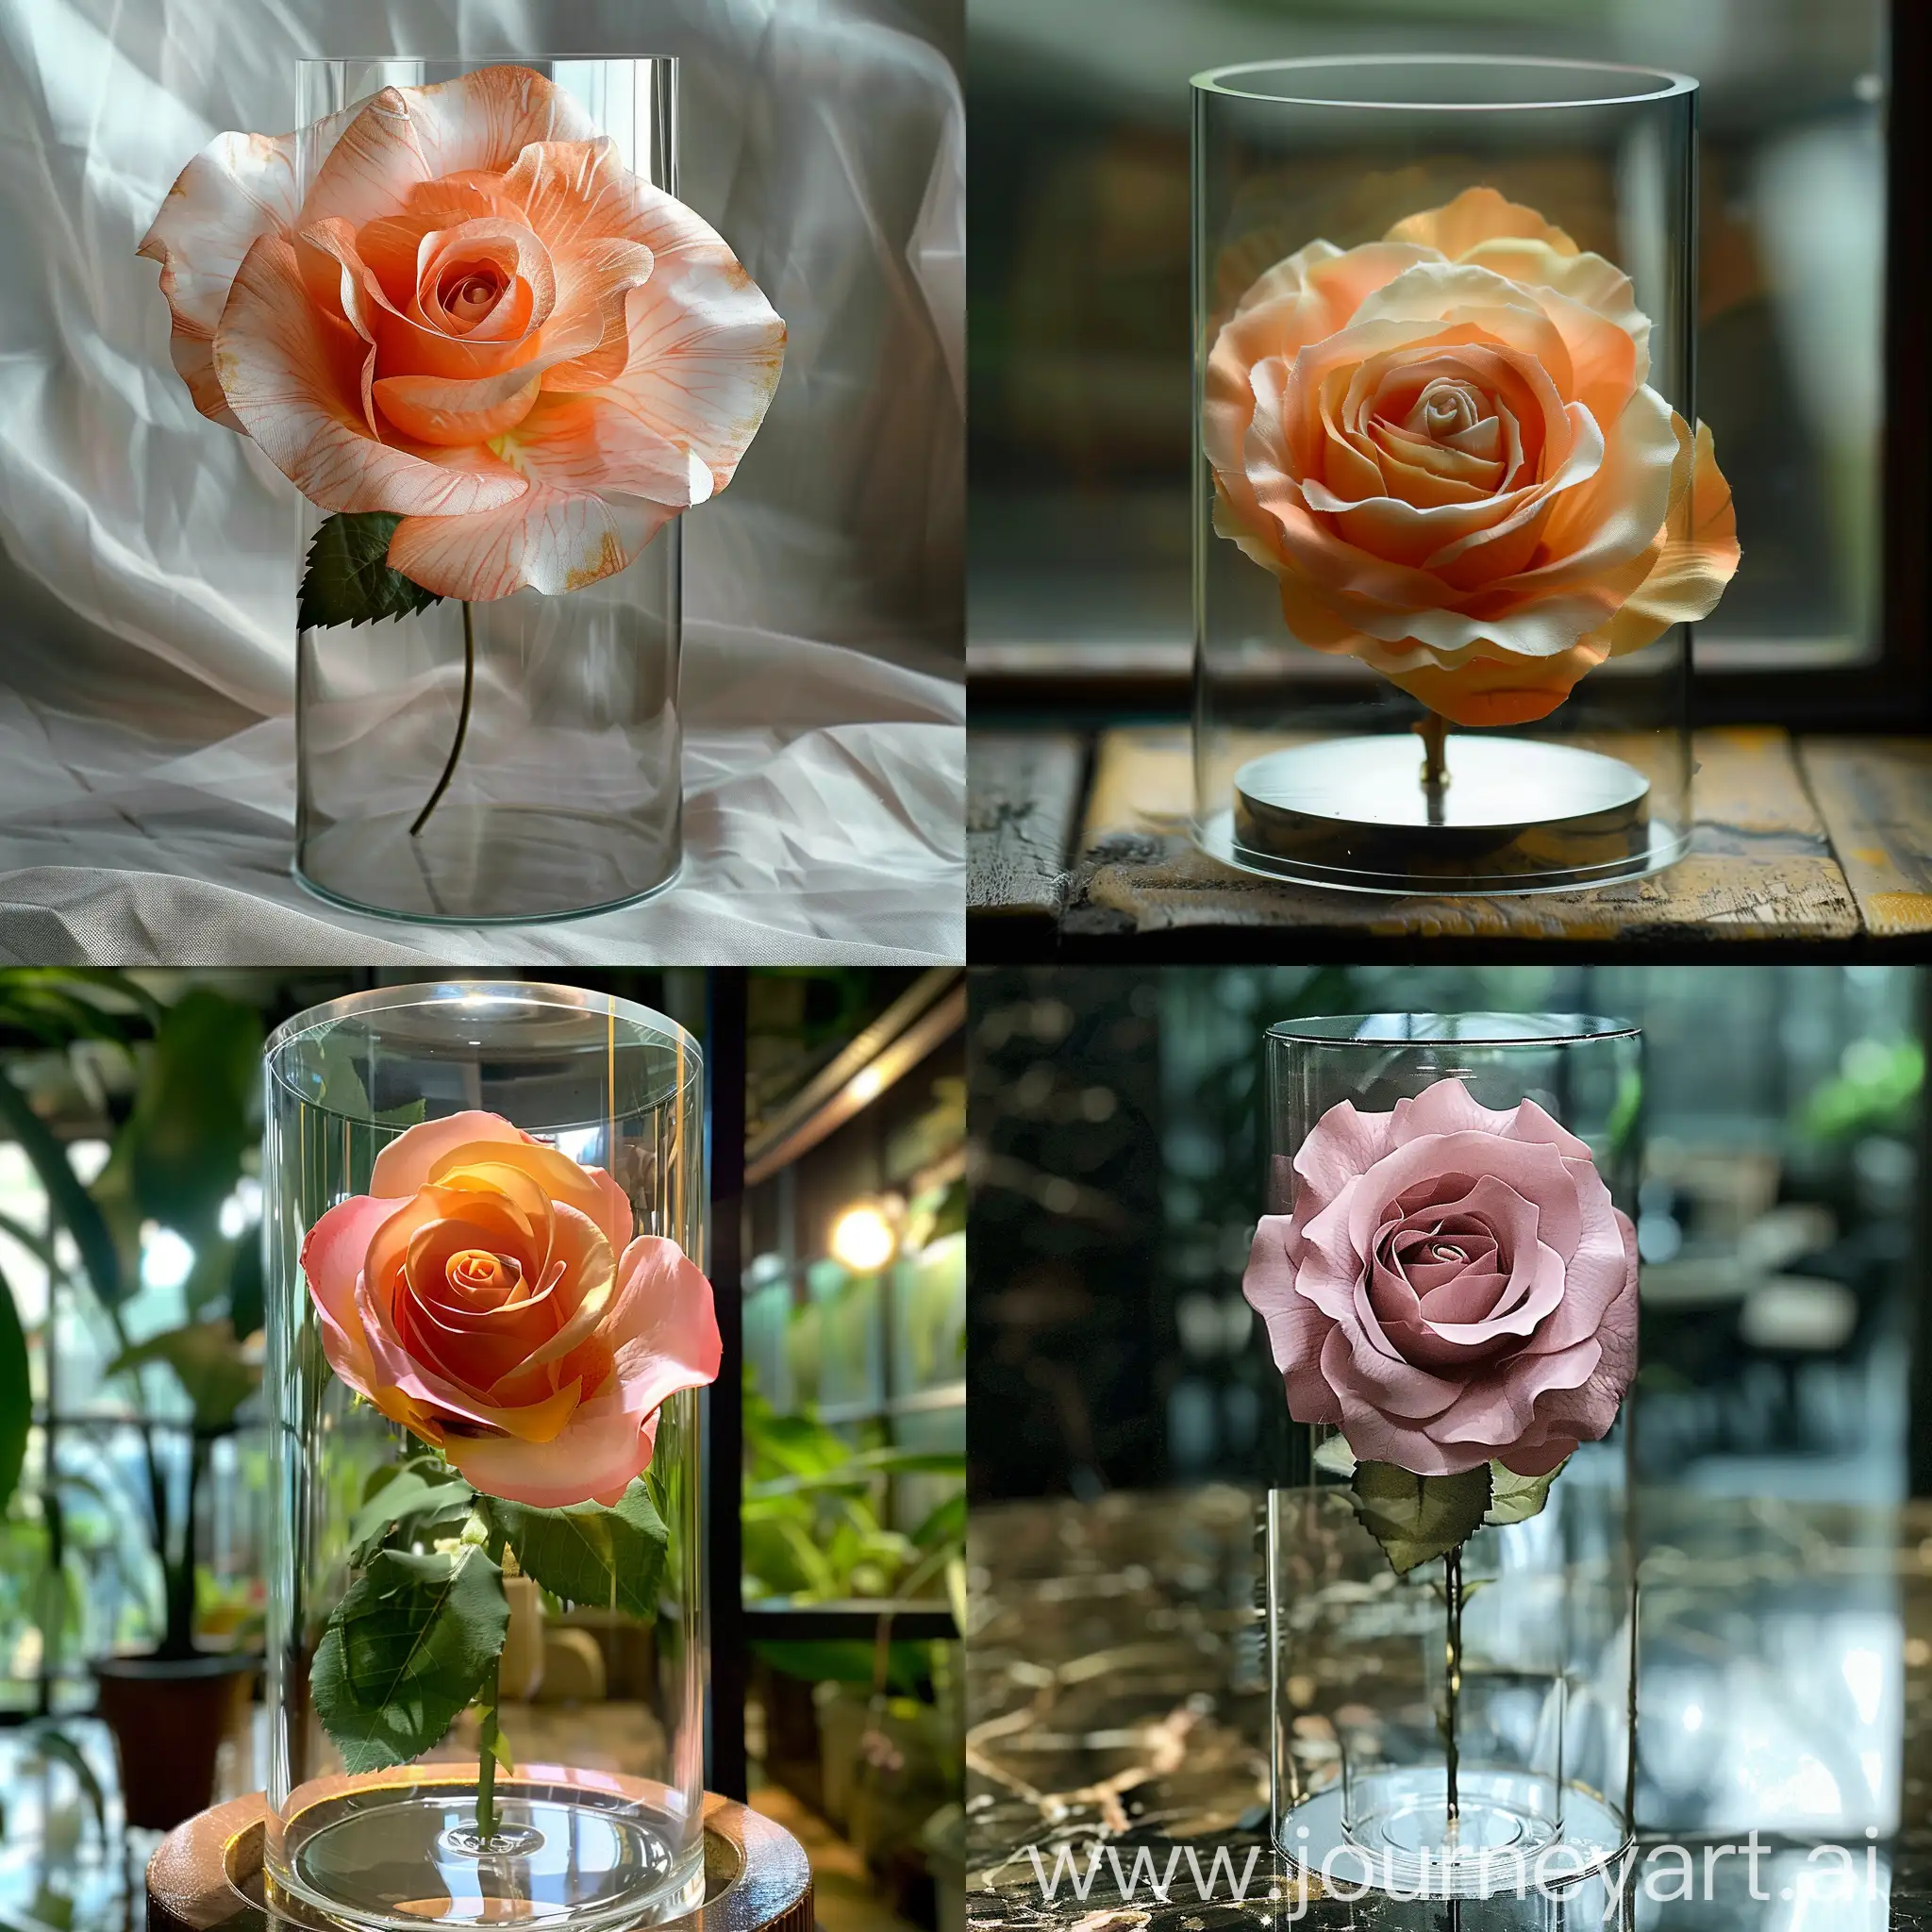 (real photo of a very beautiful and delicate flower) which is inside a cylindrical glass box, a rose, a masterpiece, beautiful, eye-catching, in a royal house, very beautiful, royal, royal, cylindrical glass flower